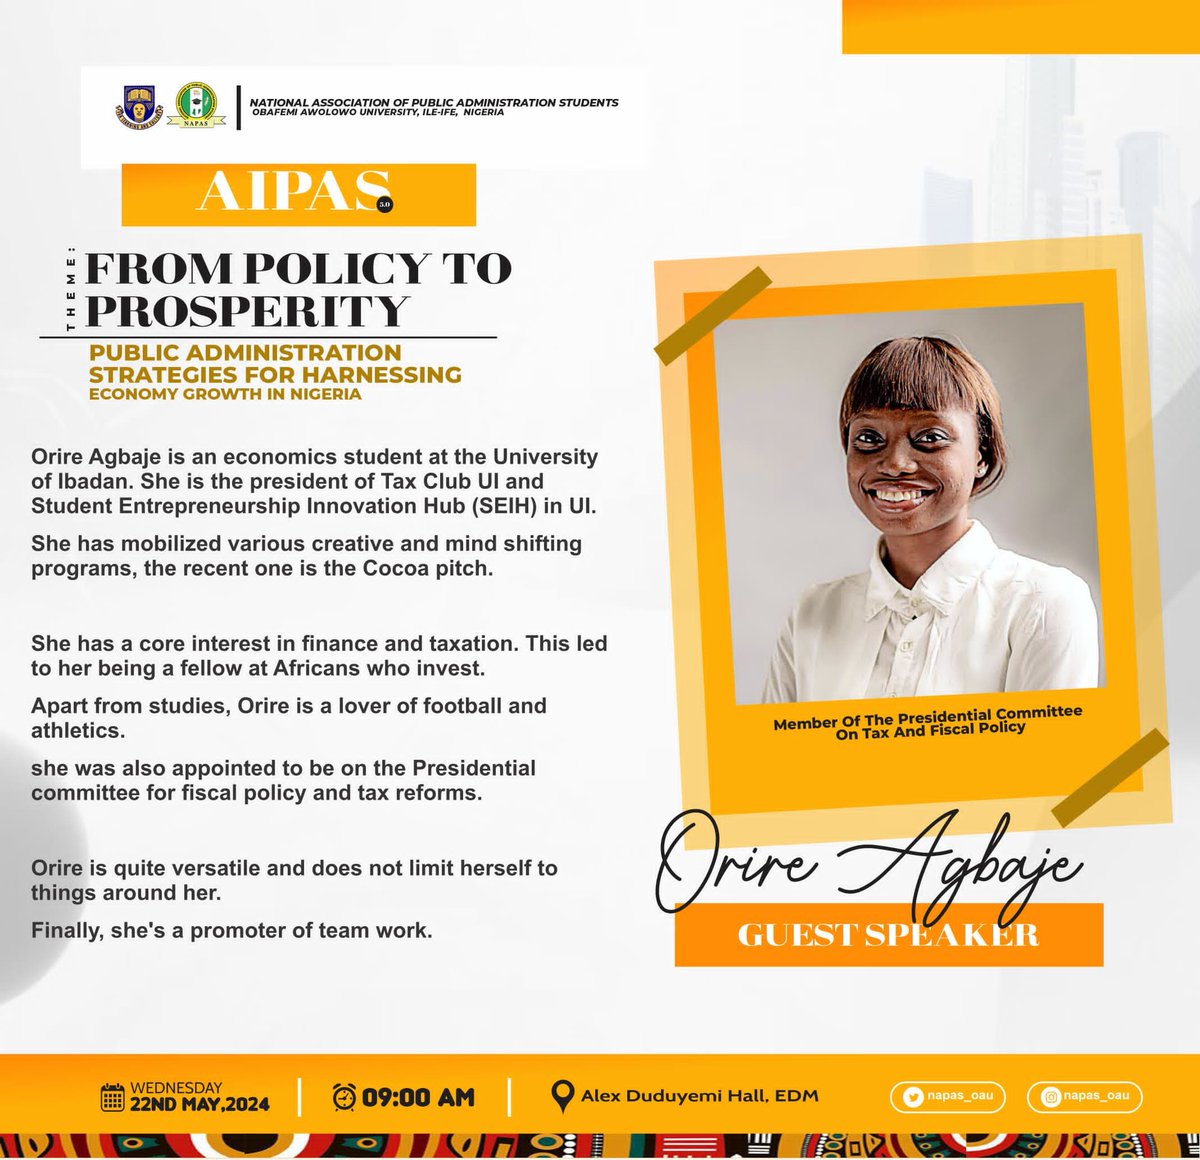 Agbaje Orire is our Guest Speaker for the 5th Annual Ife Public Administration Summit (AIPAS 5.0) scheduled to hold on Wednesday, May 22nd, 2024.